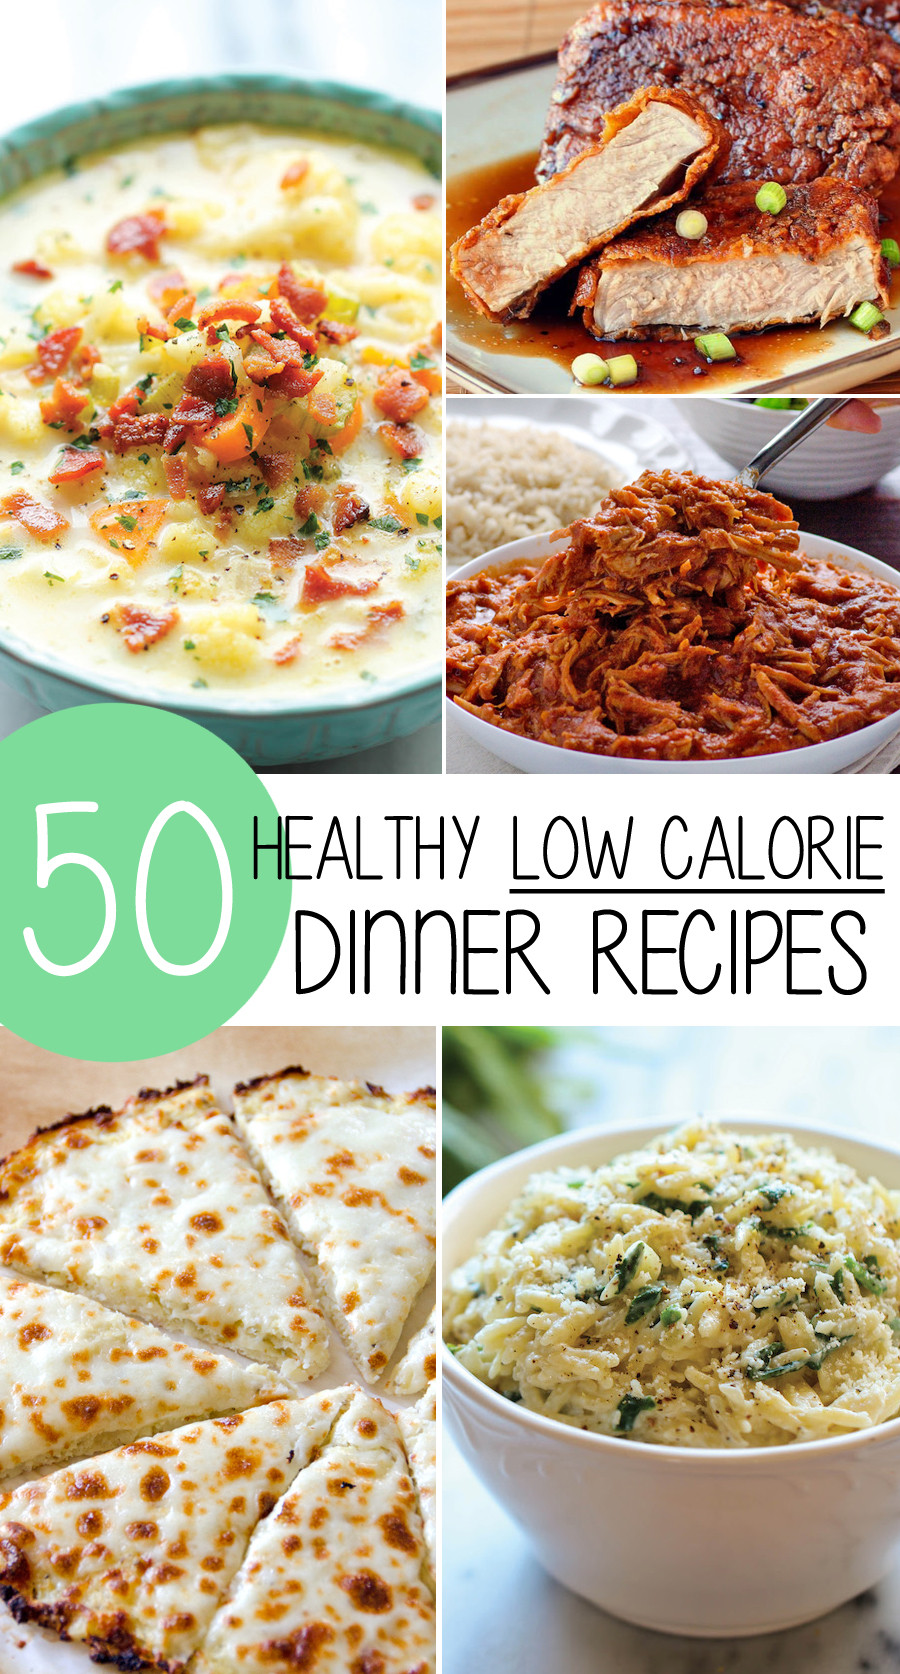 Healthy Low Calorie Dinner Recipes Awesome 50 Healthy Low Calorie Weight Loss Dinner Recipes